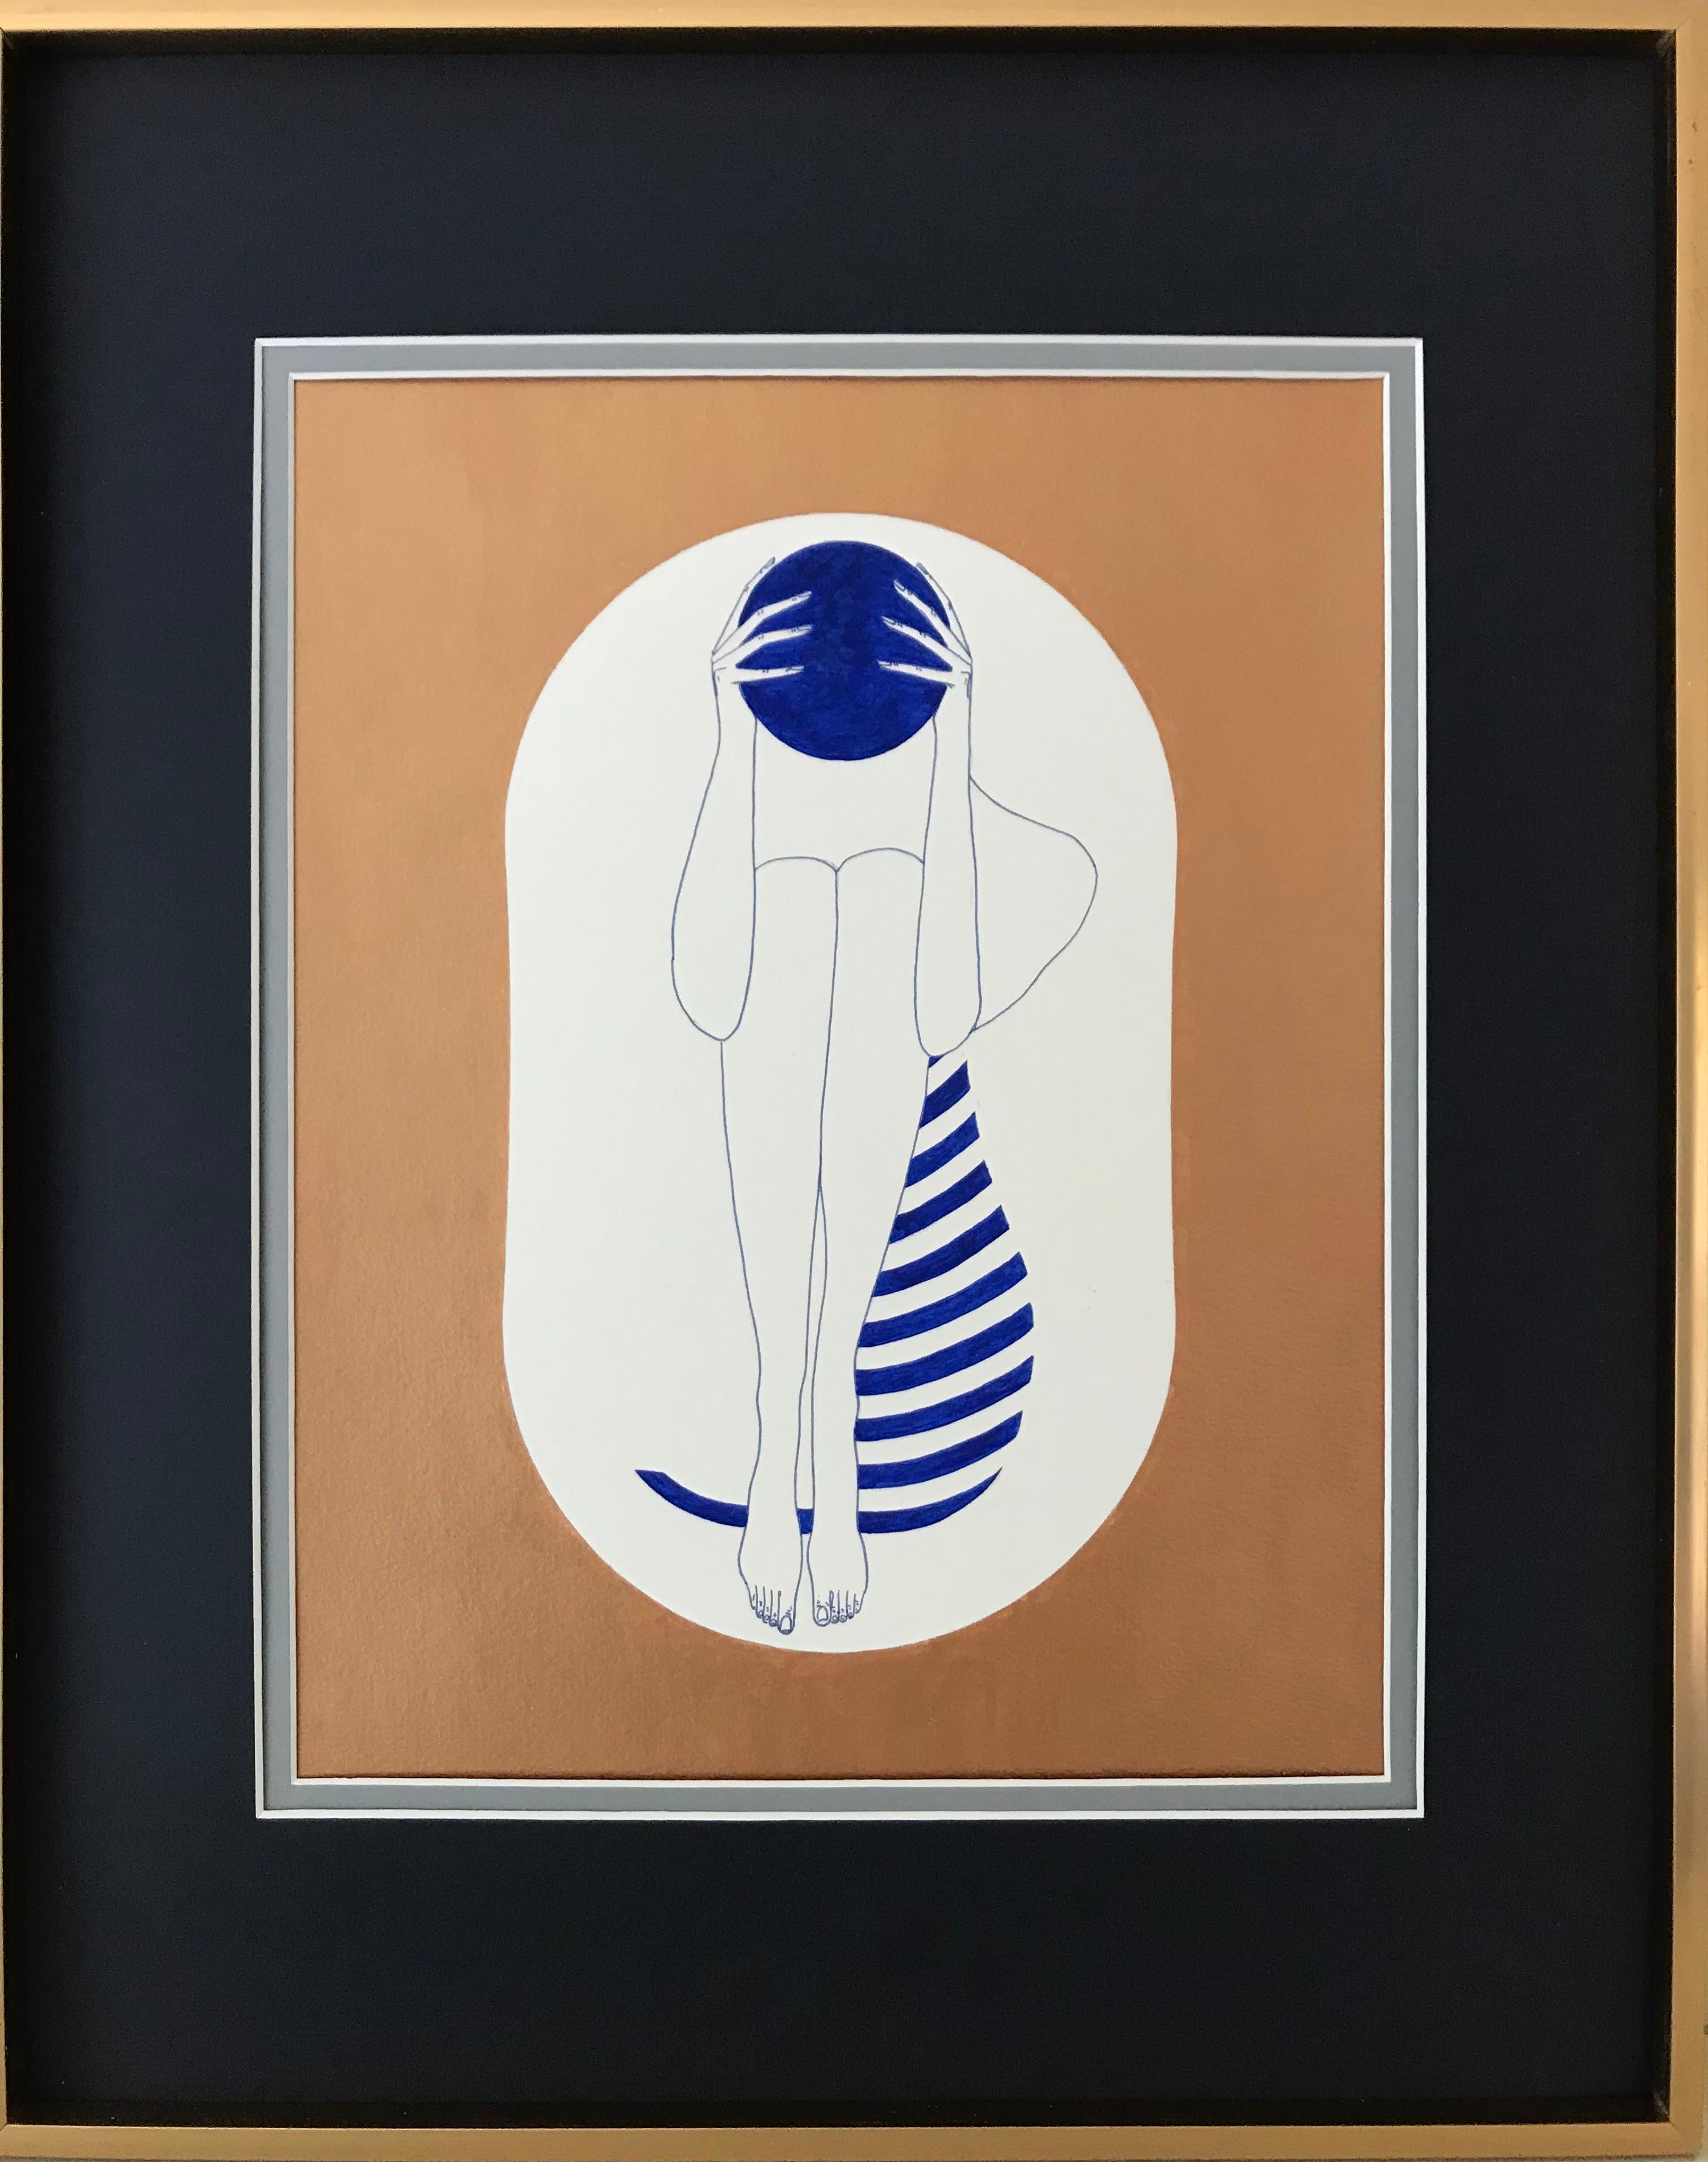 Bronze and white capsules - line drawing figure with ultramarine disk, stripes - Art by Mila Akopova